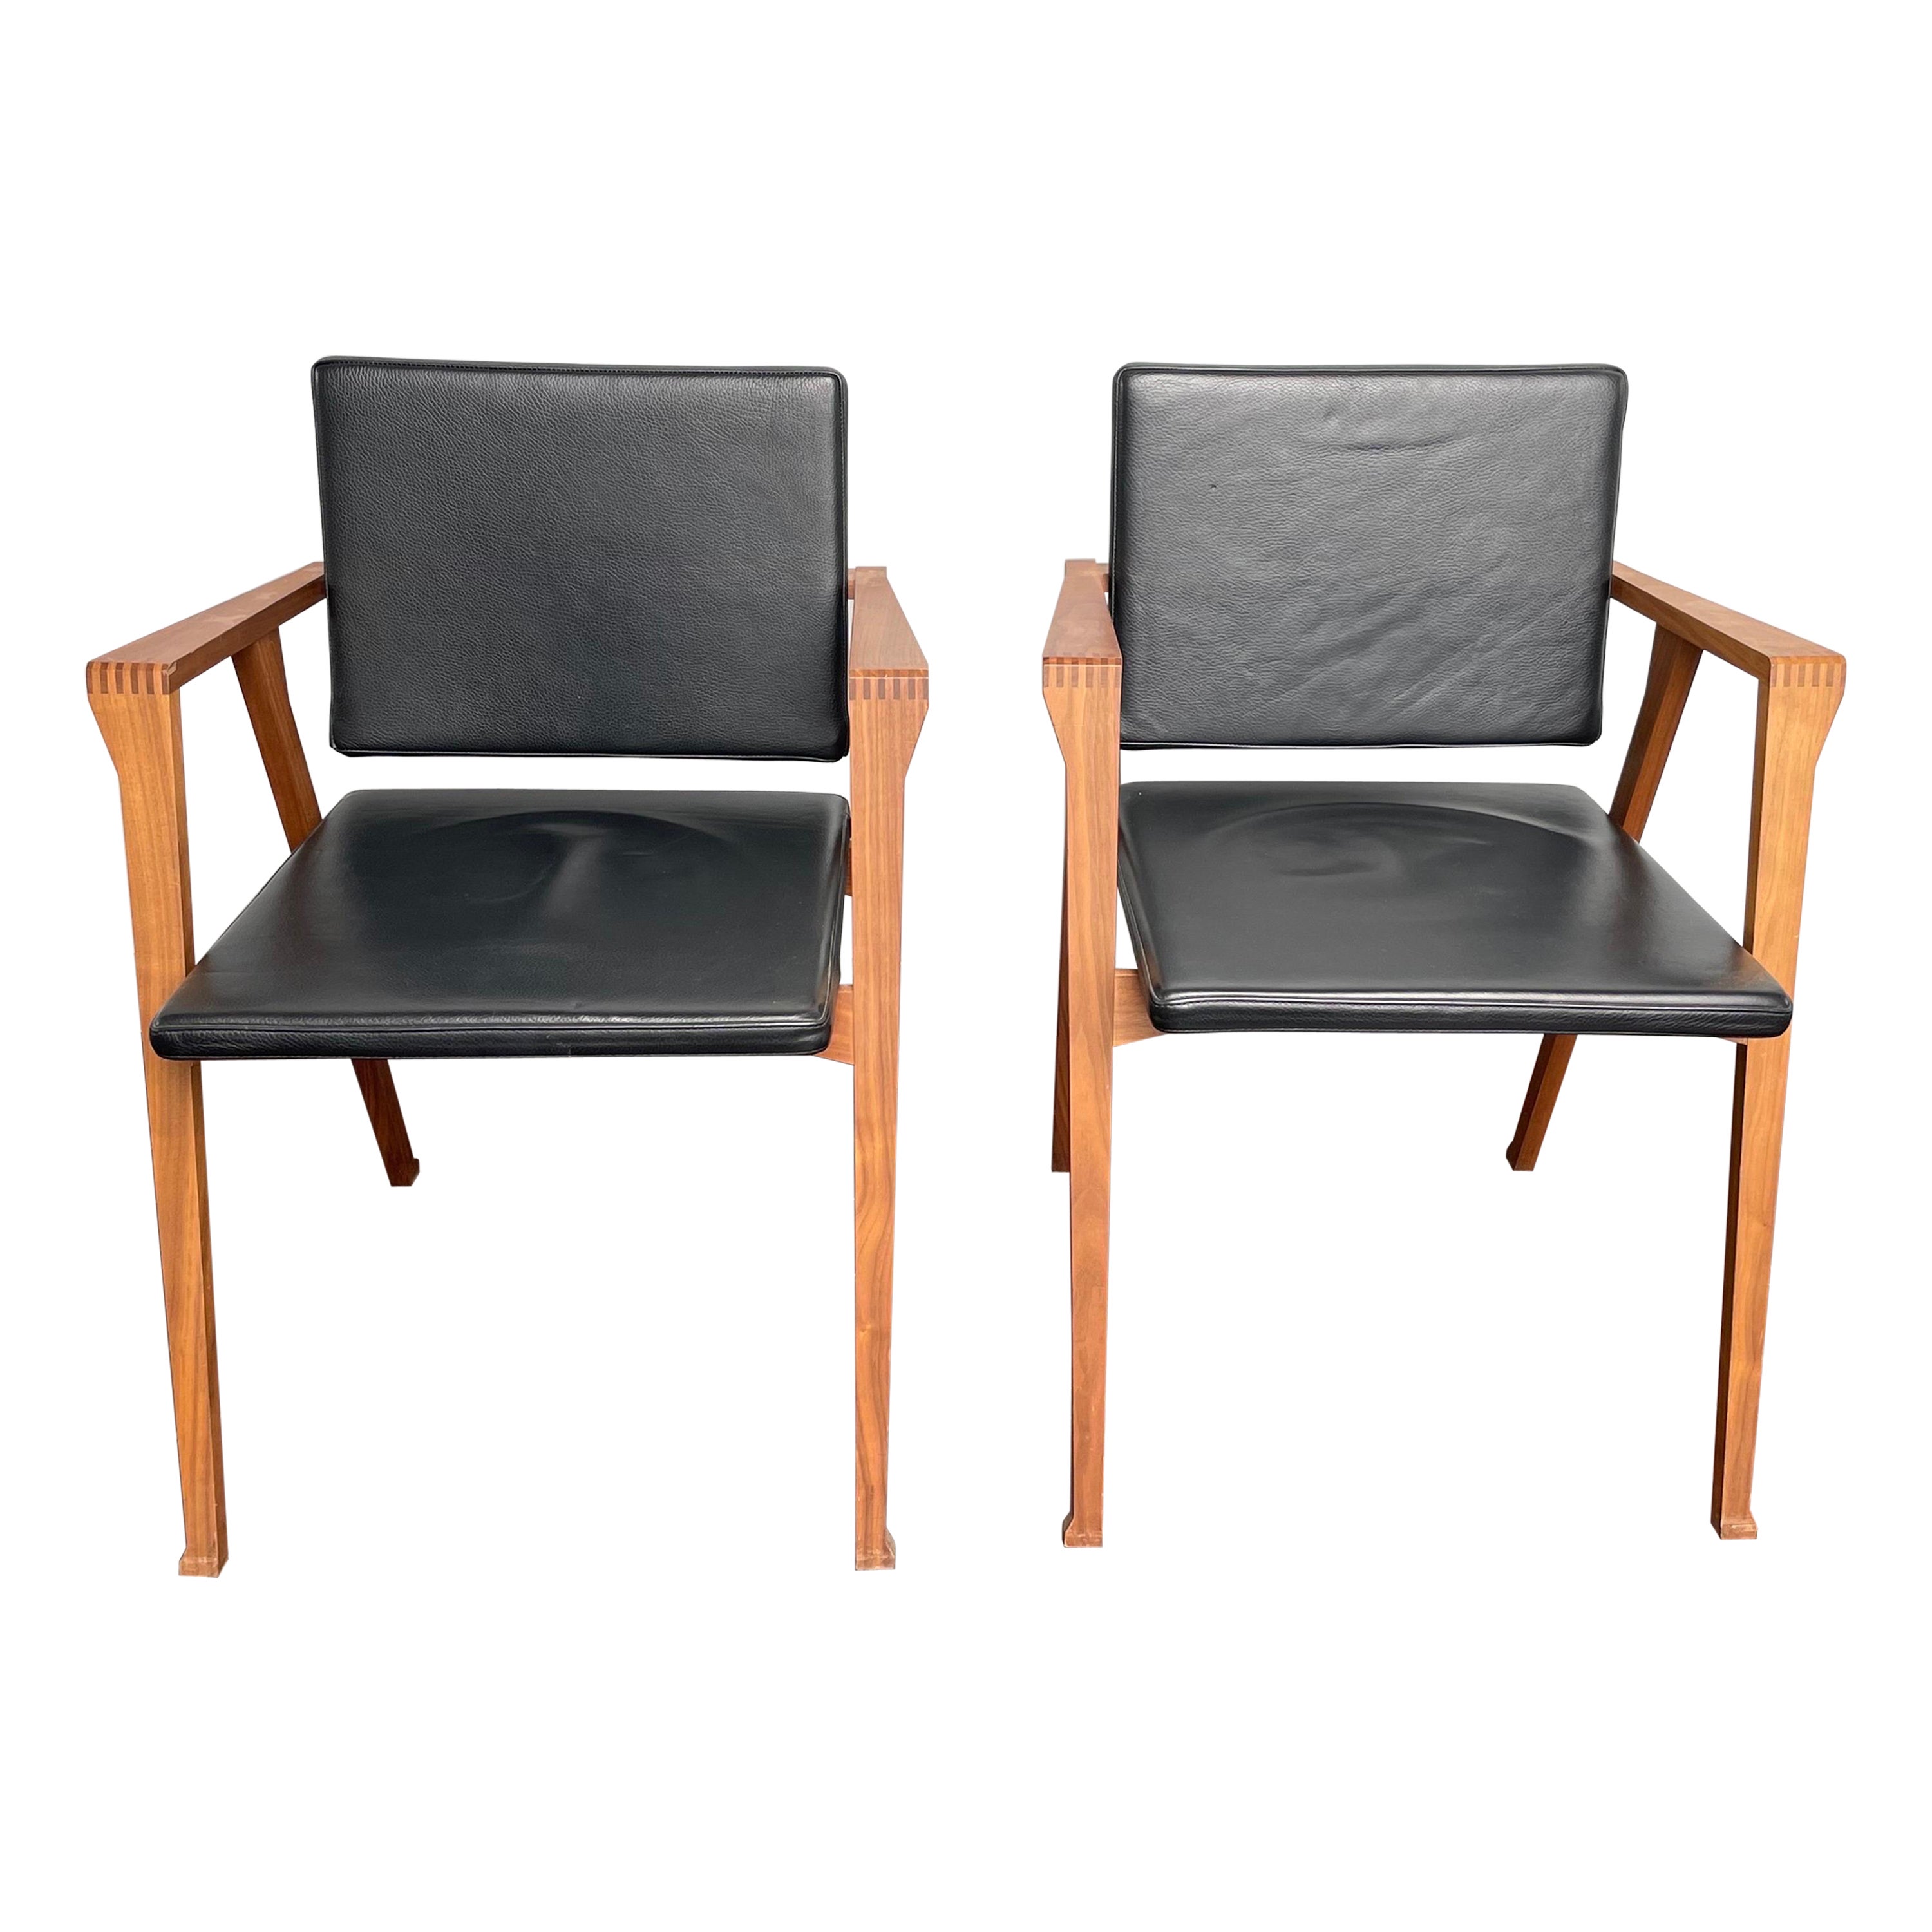 Pair of Cassina “Luisa” Dining Chairs by Franco Albini